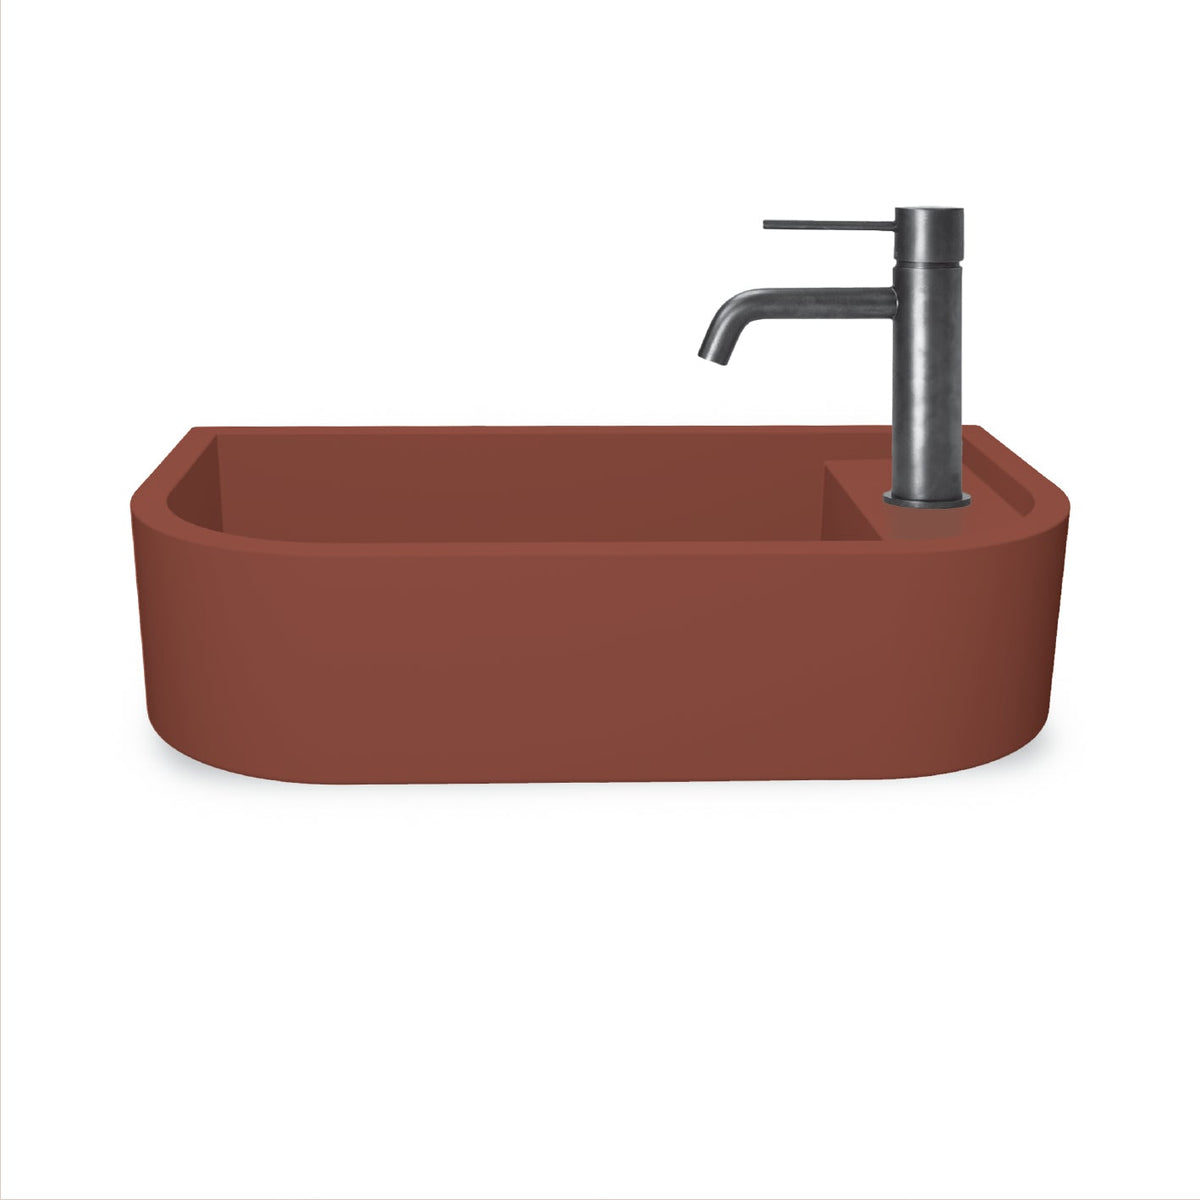 Loop 02 Basin - Overflow - Wall Hung (Clay,Tap Hole,White)